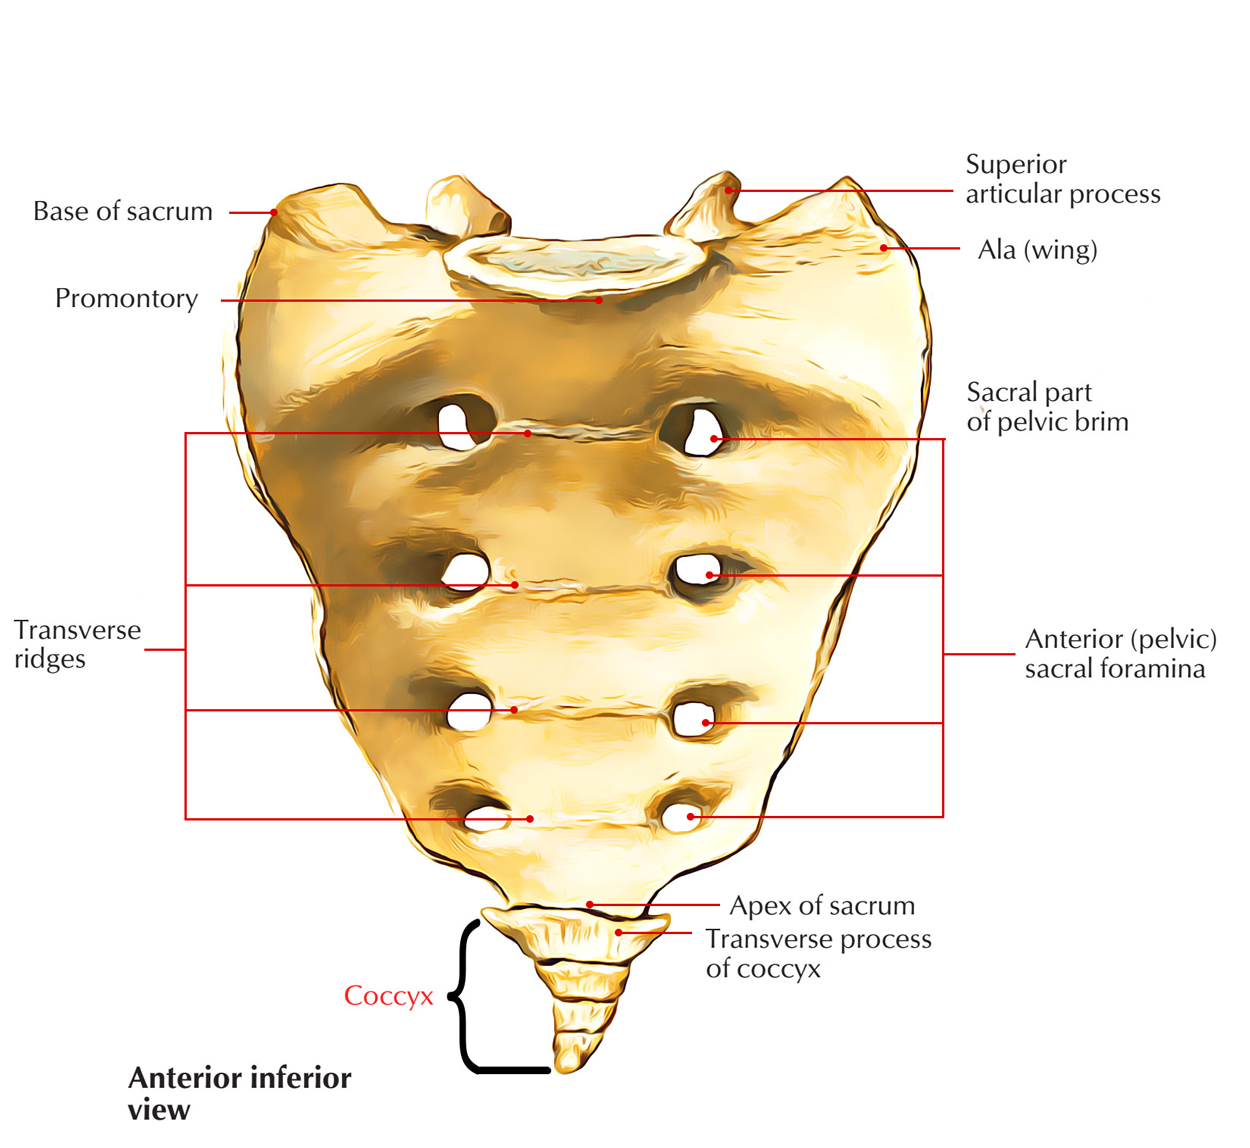 Understanding the Structure of the Vertebral Column and Coccyx